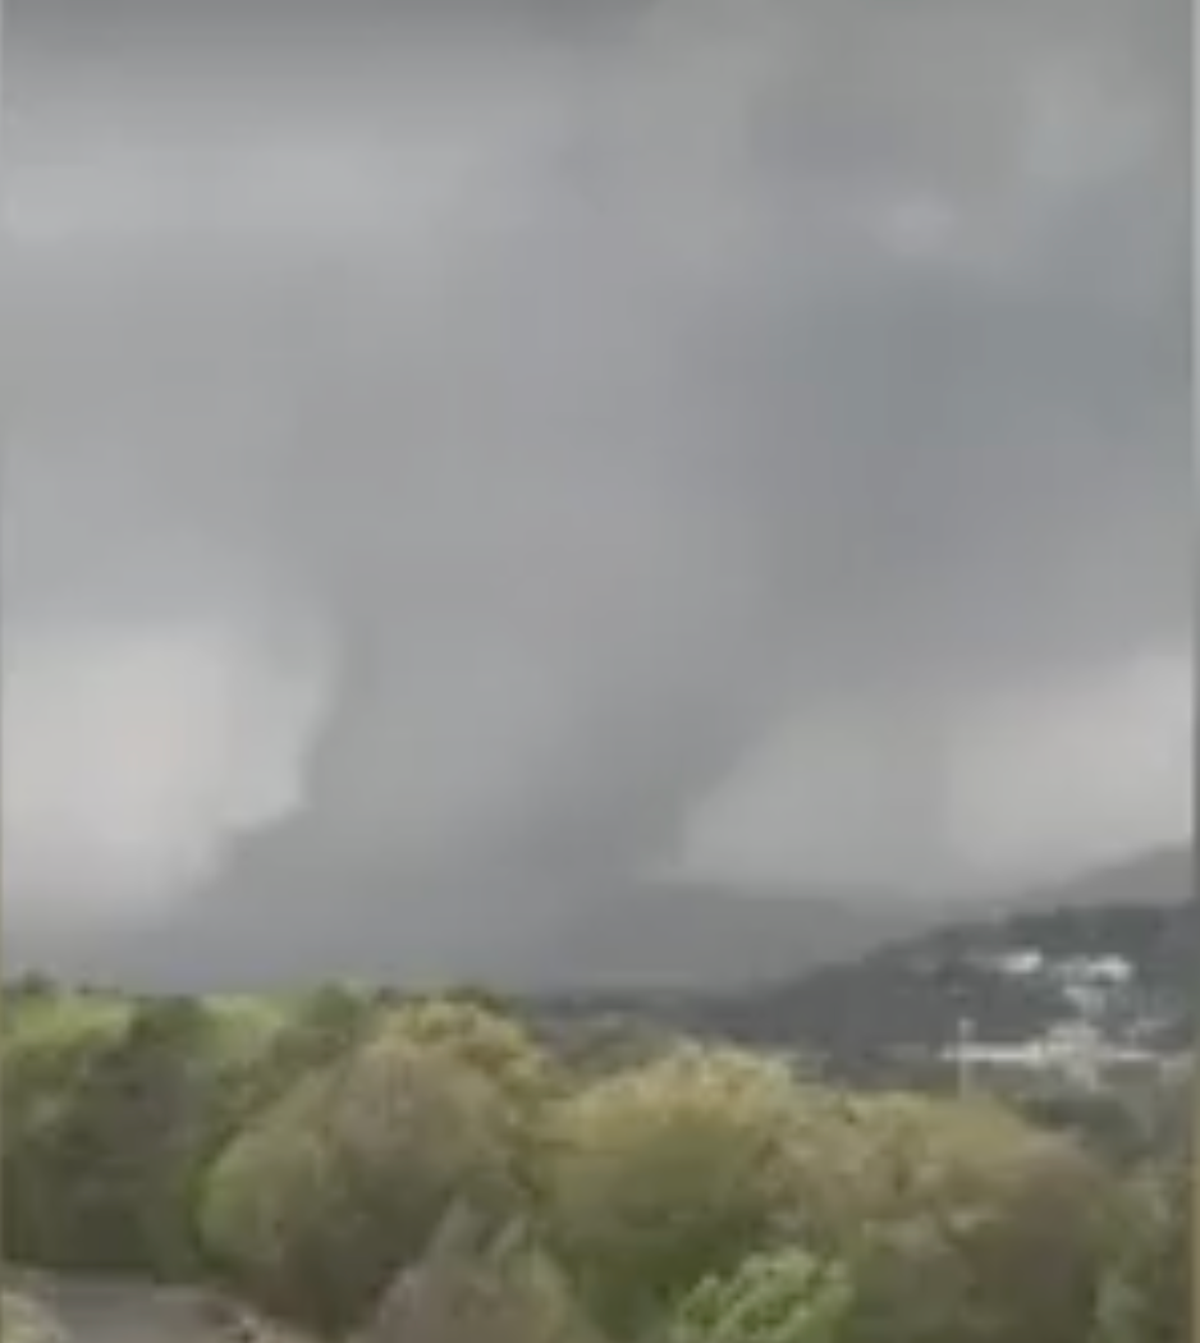 At least 26 killed as tornadoes tear through American states